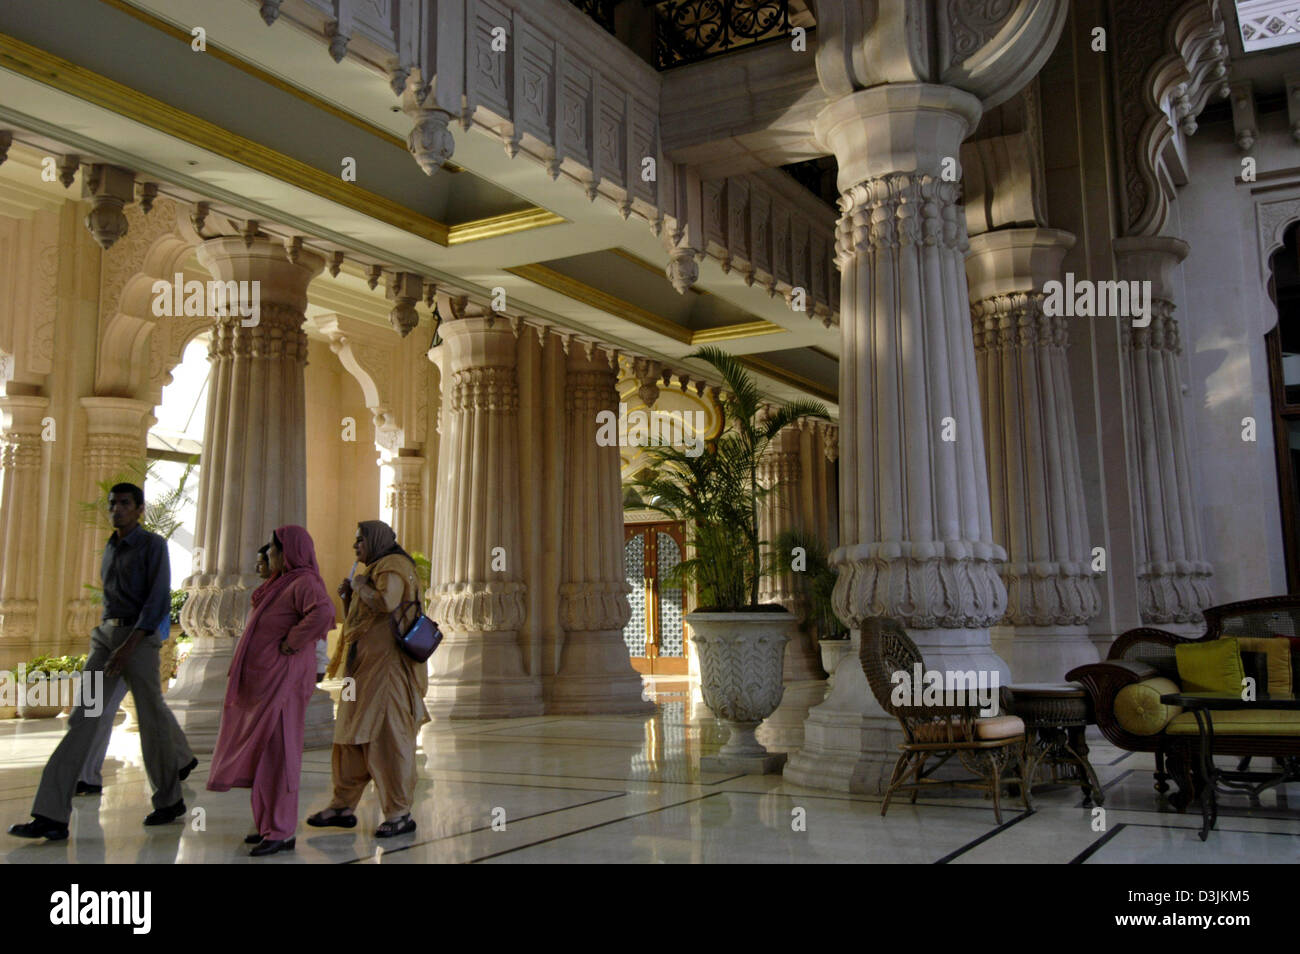 (dpa) - The photo shows the entrance hall of the luxurious hotel 'Leela Palace' in Bangalore, India, 3 February 2005. The hotel is one of India's most expensive lodgings. Stock Photo